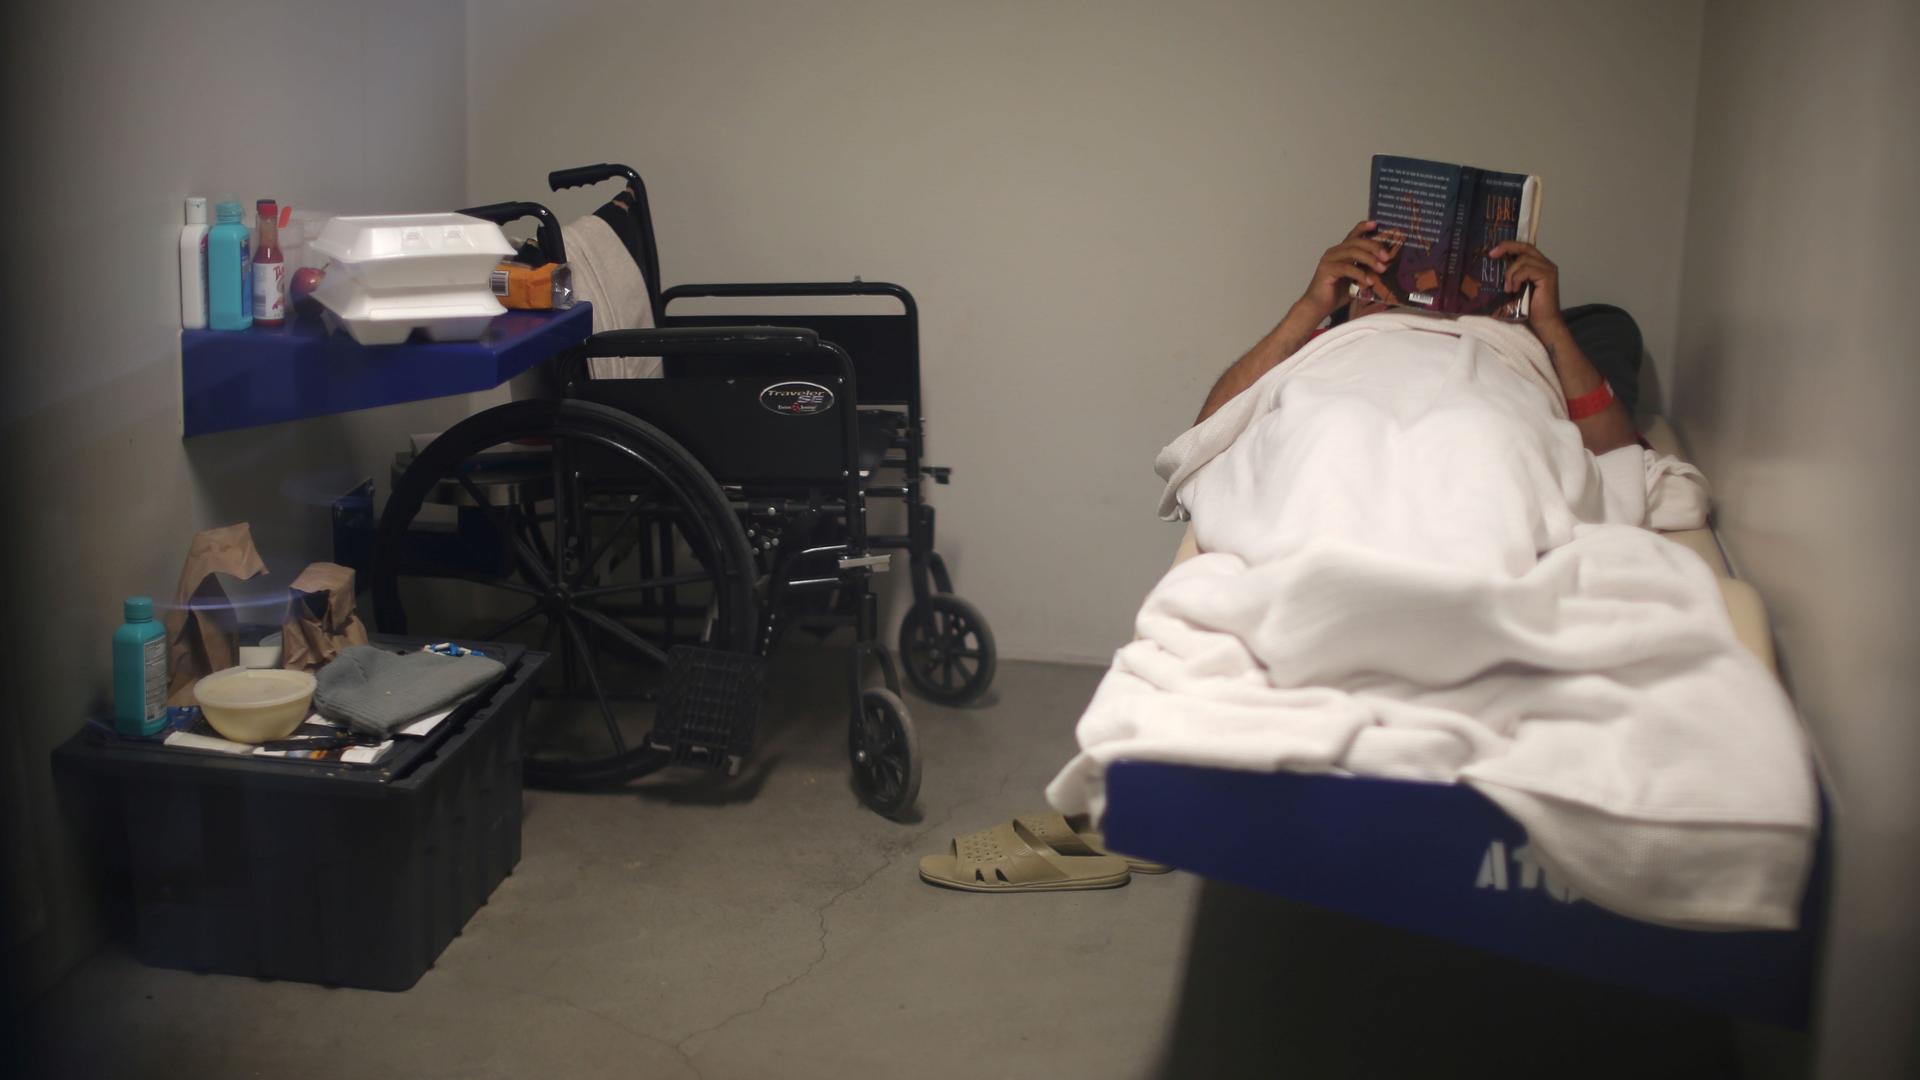 Man lies in bed in small room with wheelchair next to him